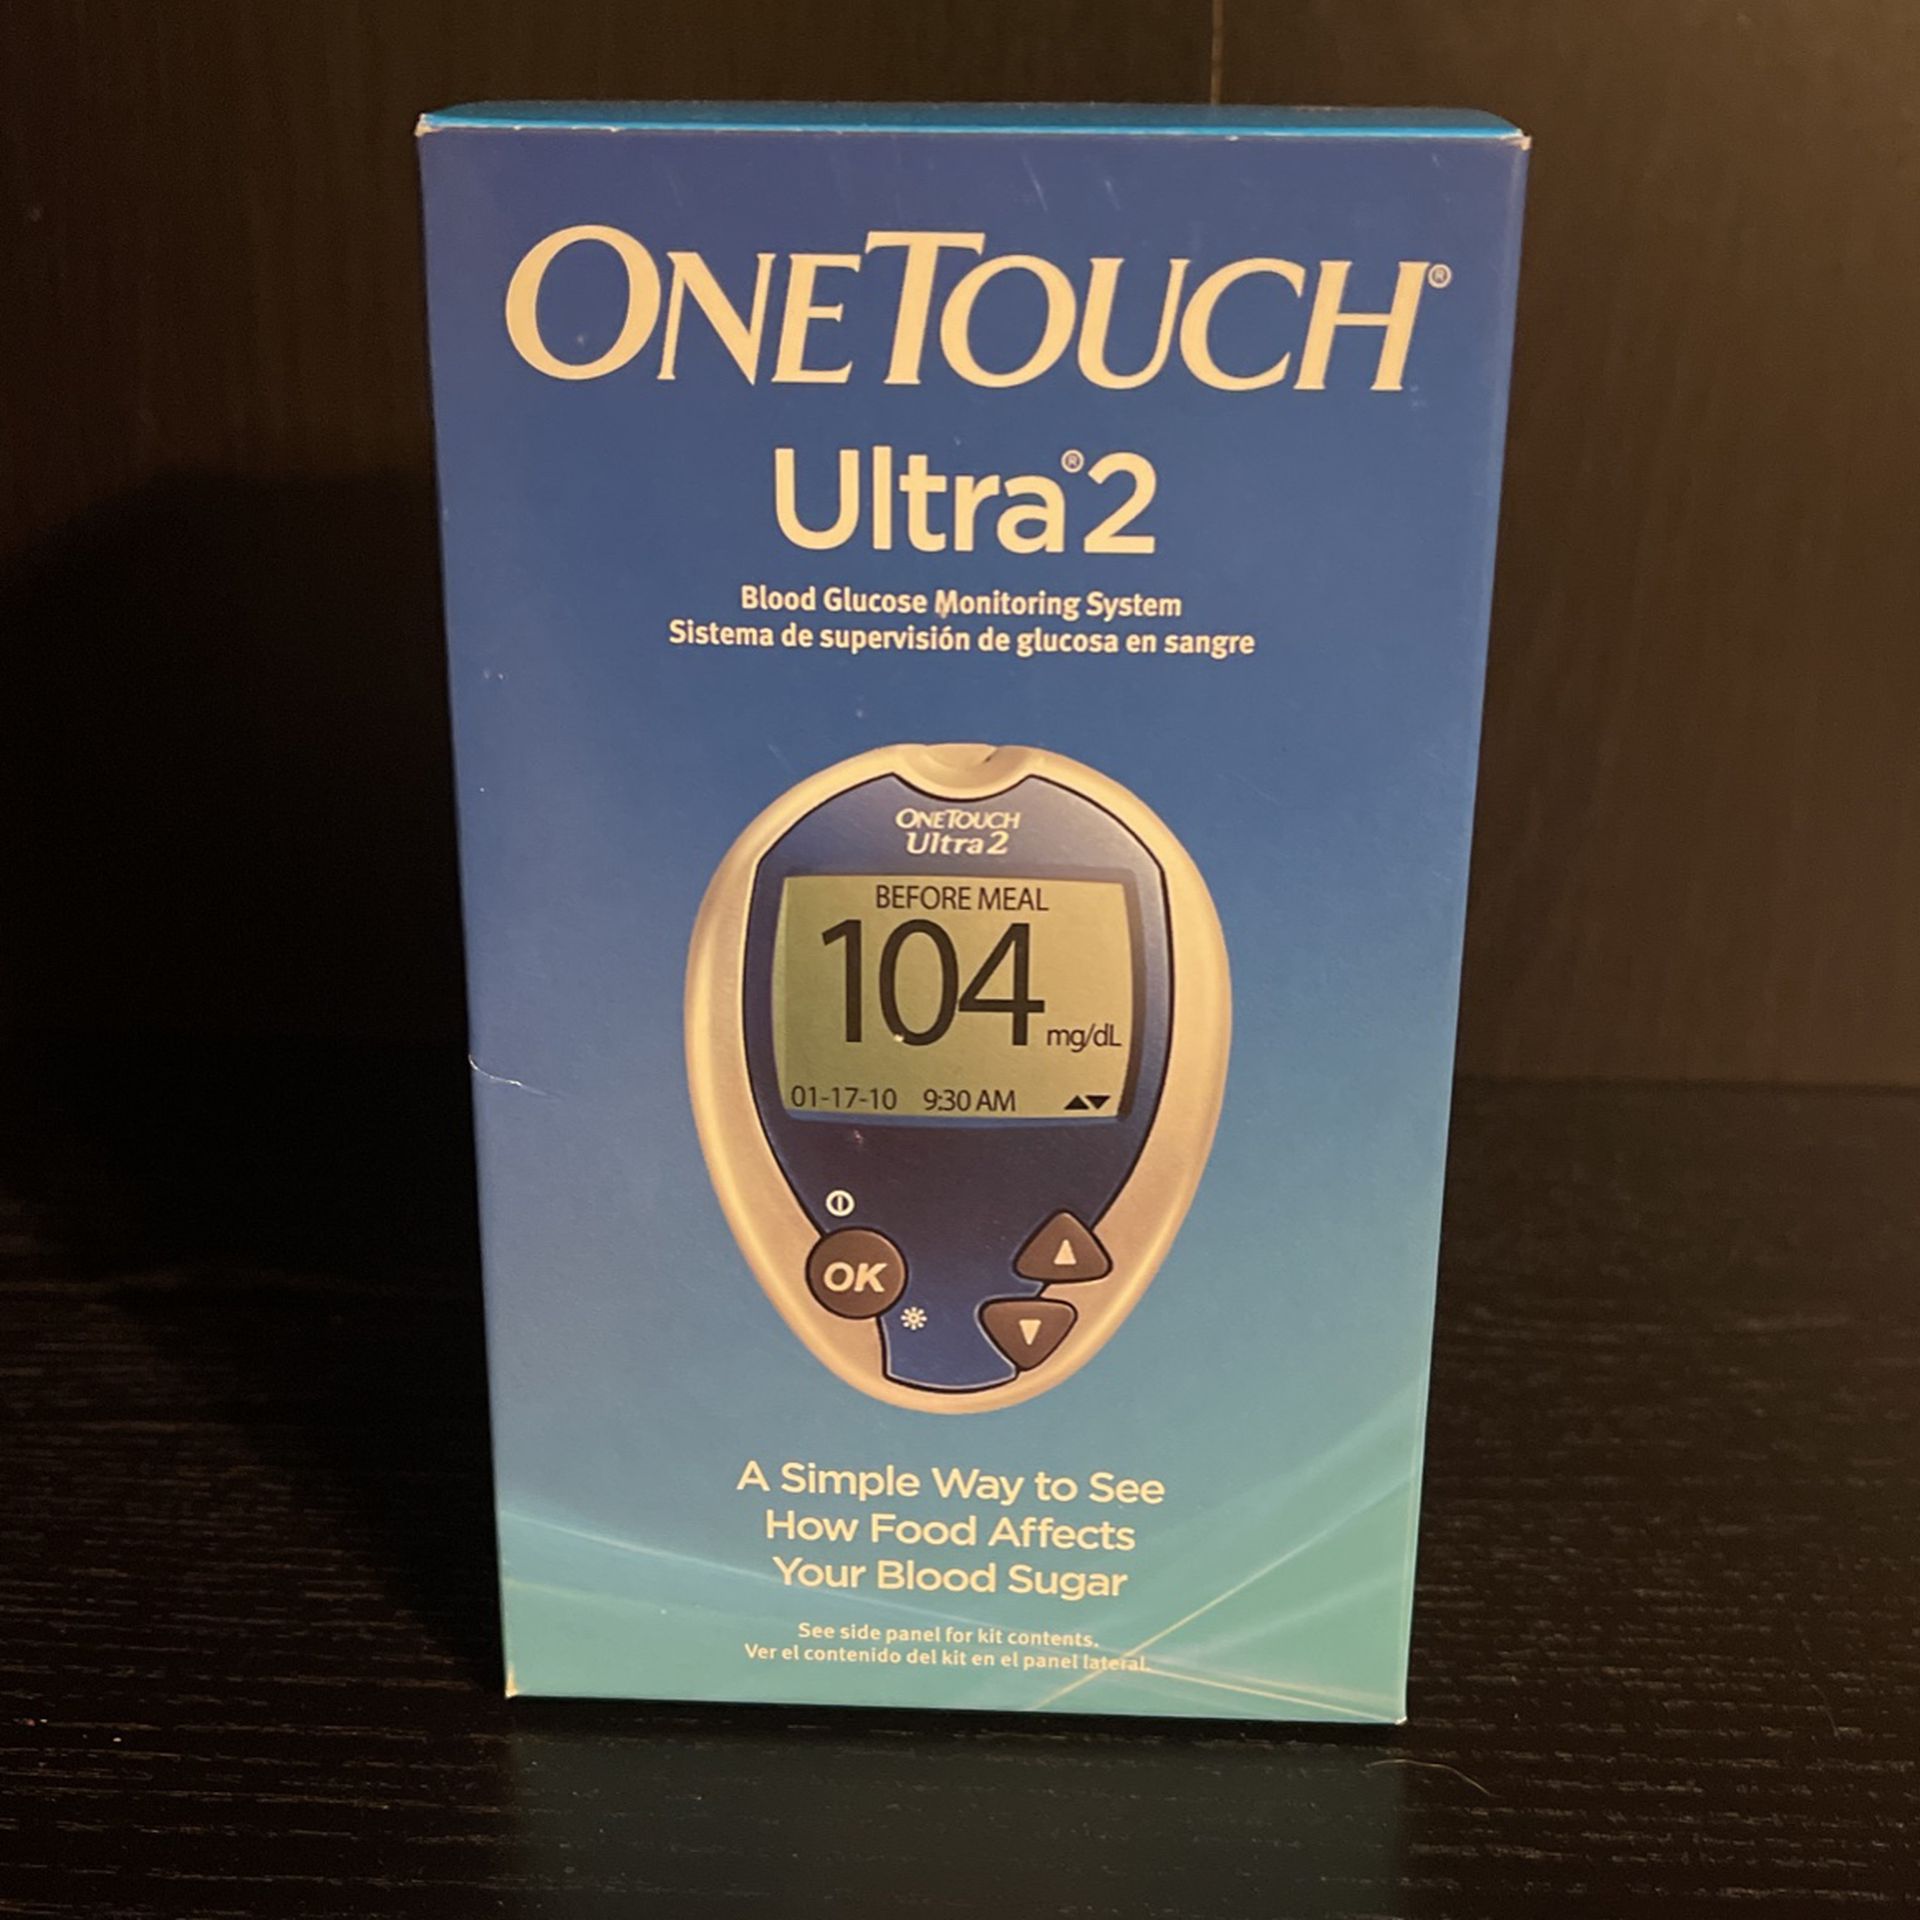 Blood Glucose Monitor System by One Touch